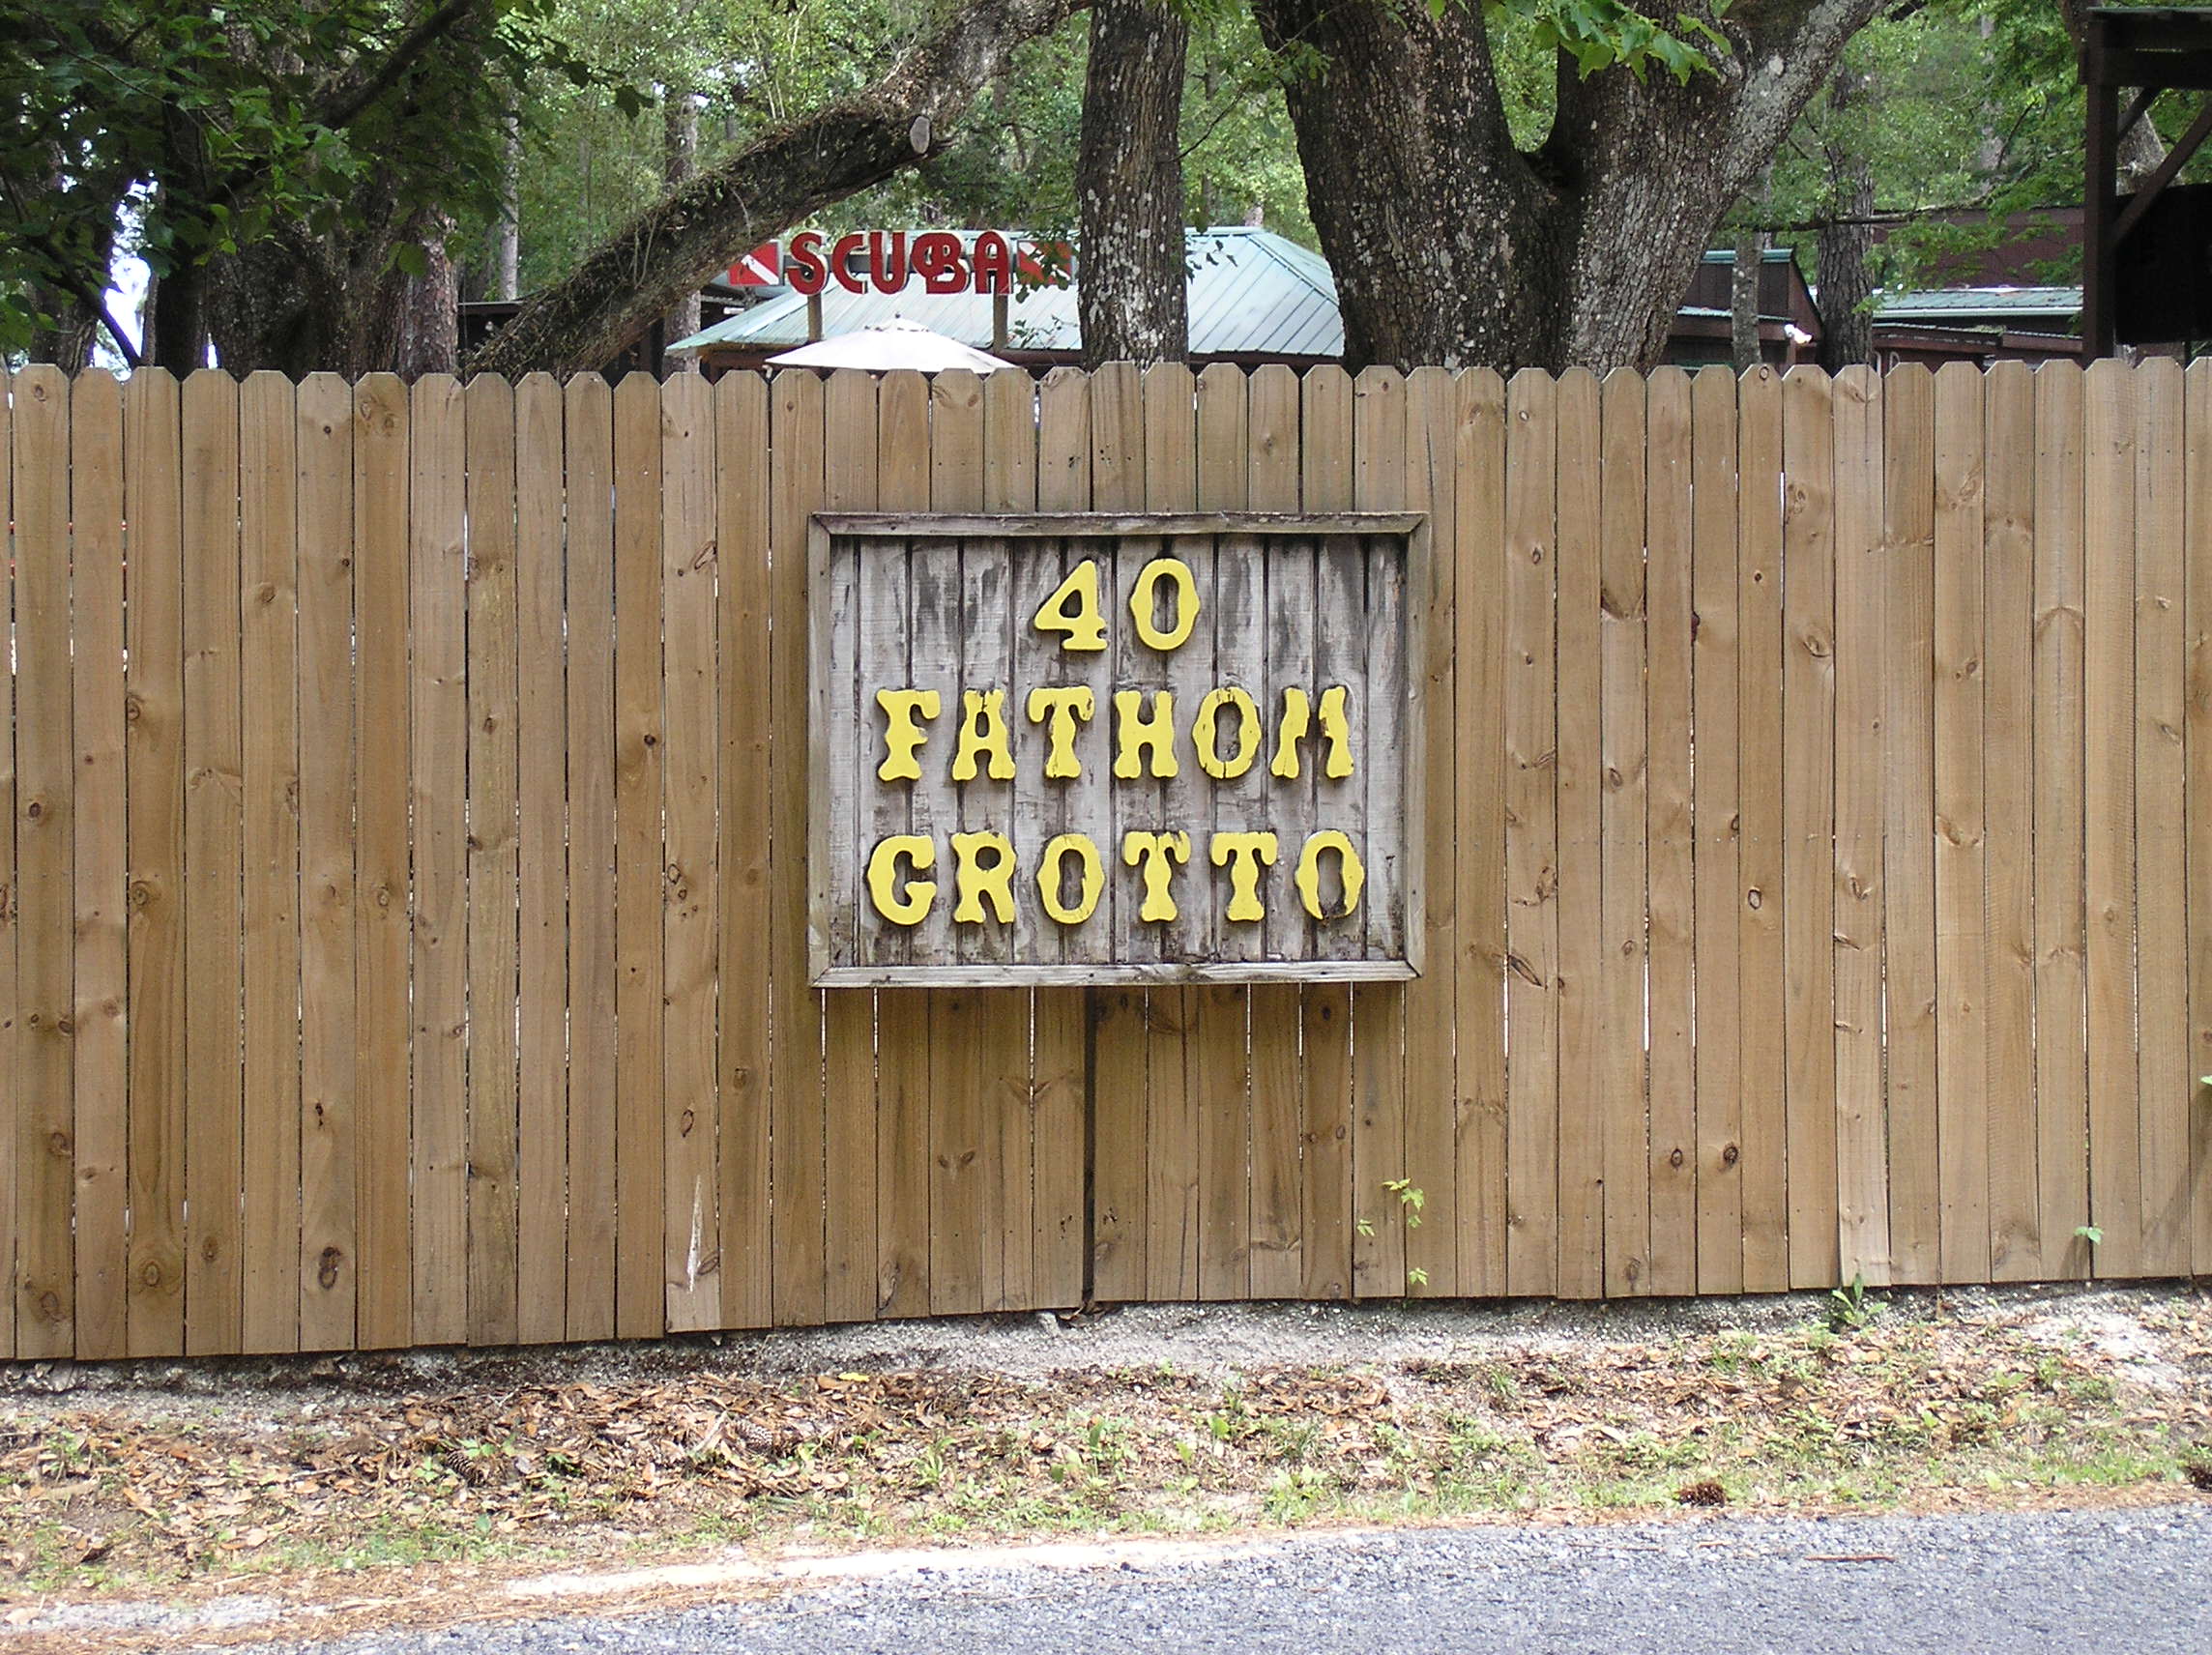 Grotto sign